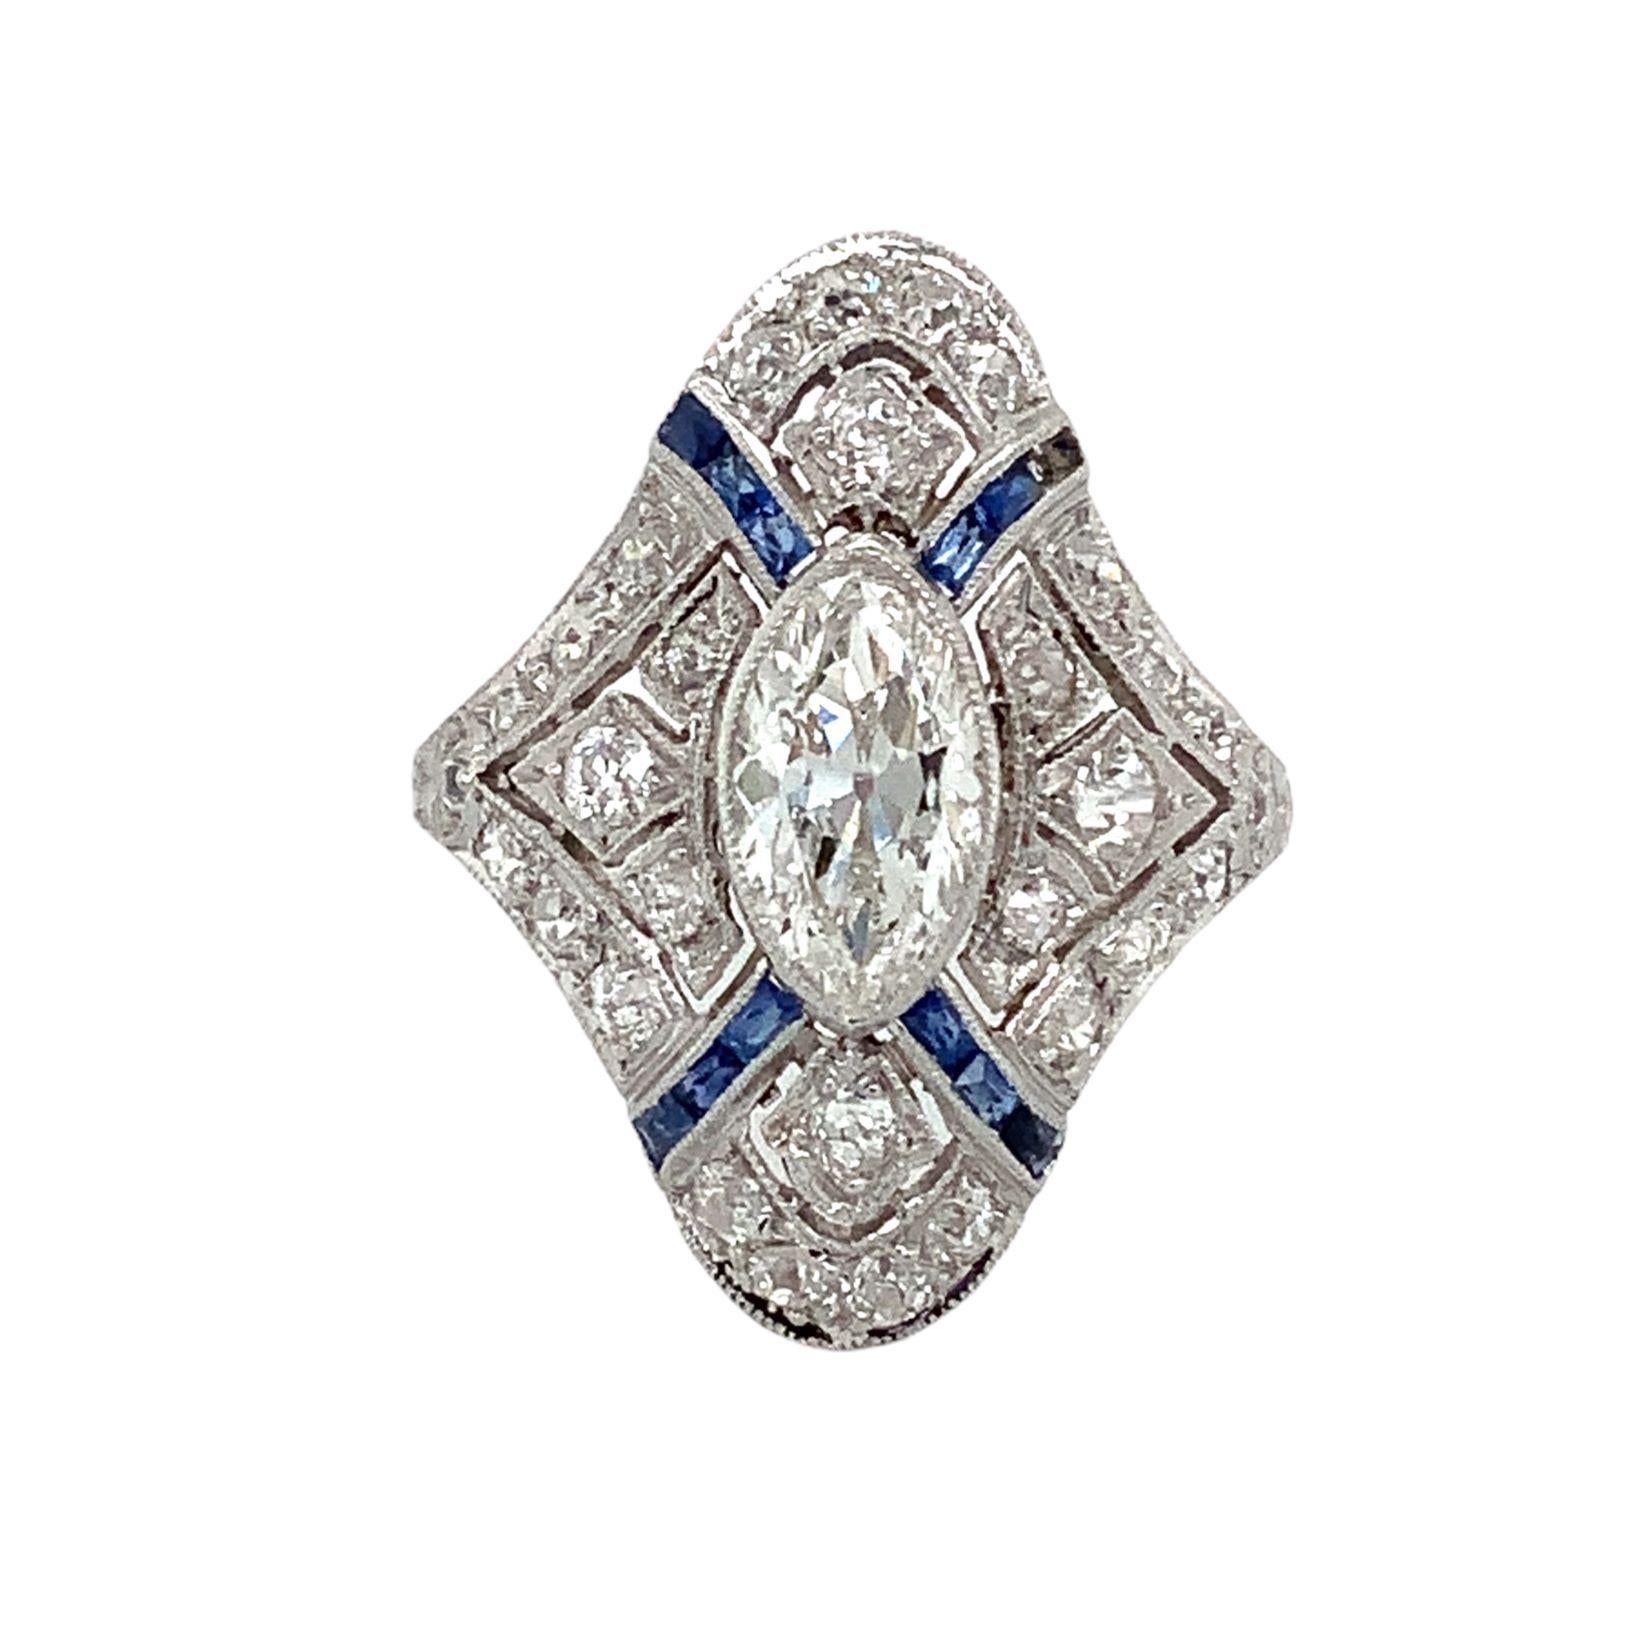 Antique Edwardian Art Deco Filigree Marquise Diamond and  Caliber Sapphire Ring set in Platinum. Circa 1910
Marquise 8.85 x 5.00 x 3.01 = 0.88 cts estimated H in Color VVS 2 in Clarity
30 Old Mine Cuts = 0.66cts estimated H in Color VS-SI in